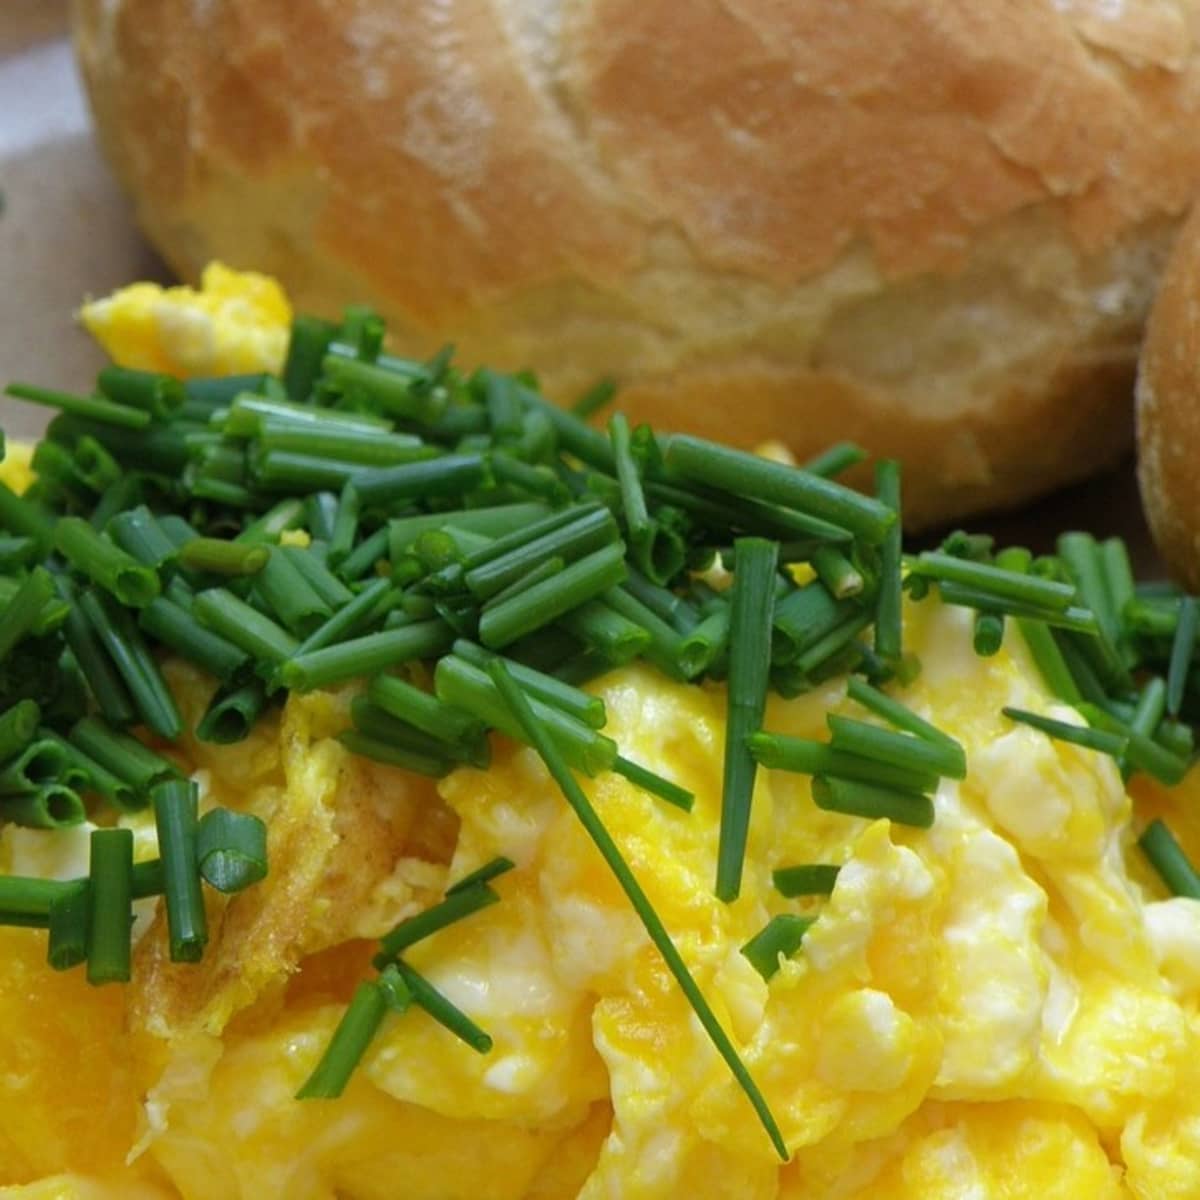 Get Fluffy Scrambled Eggs by Mixing Them in a Blender - First For Women